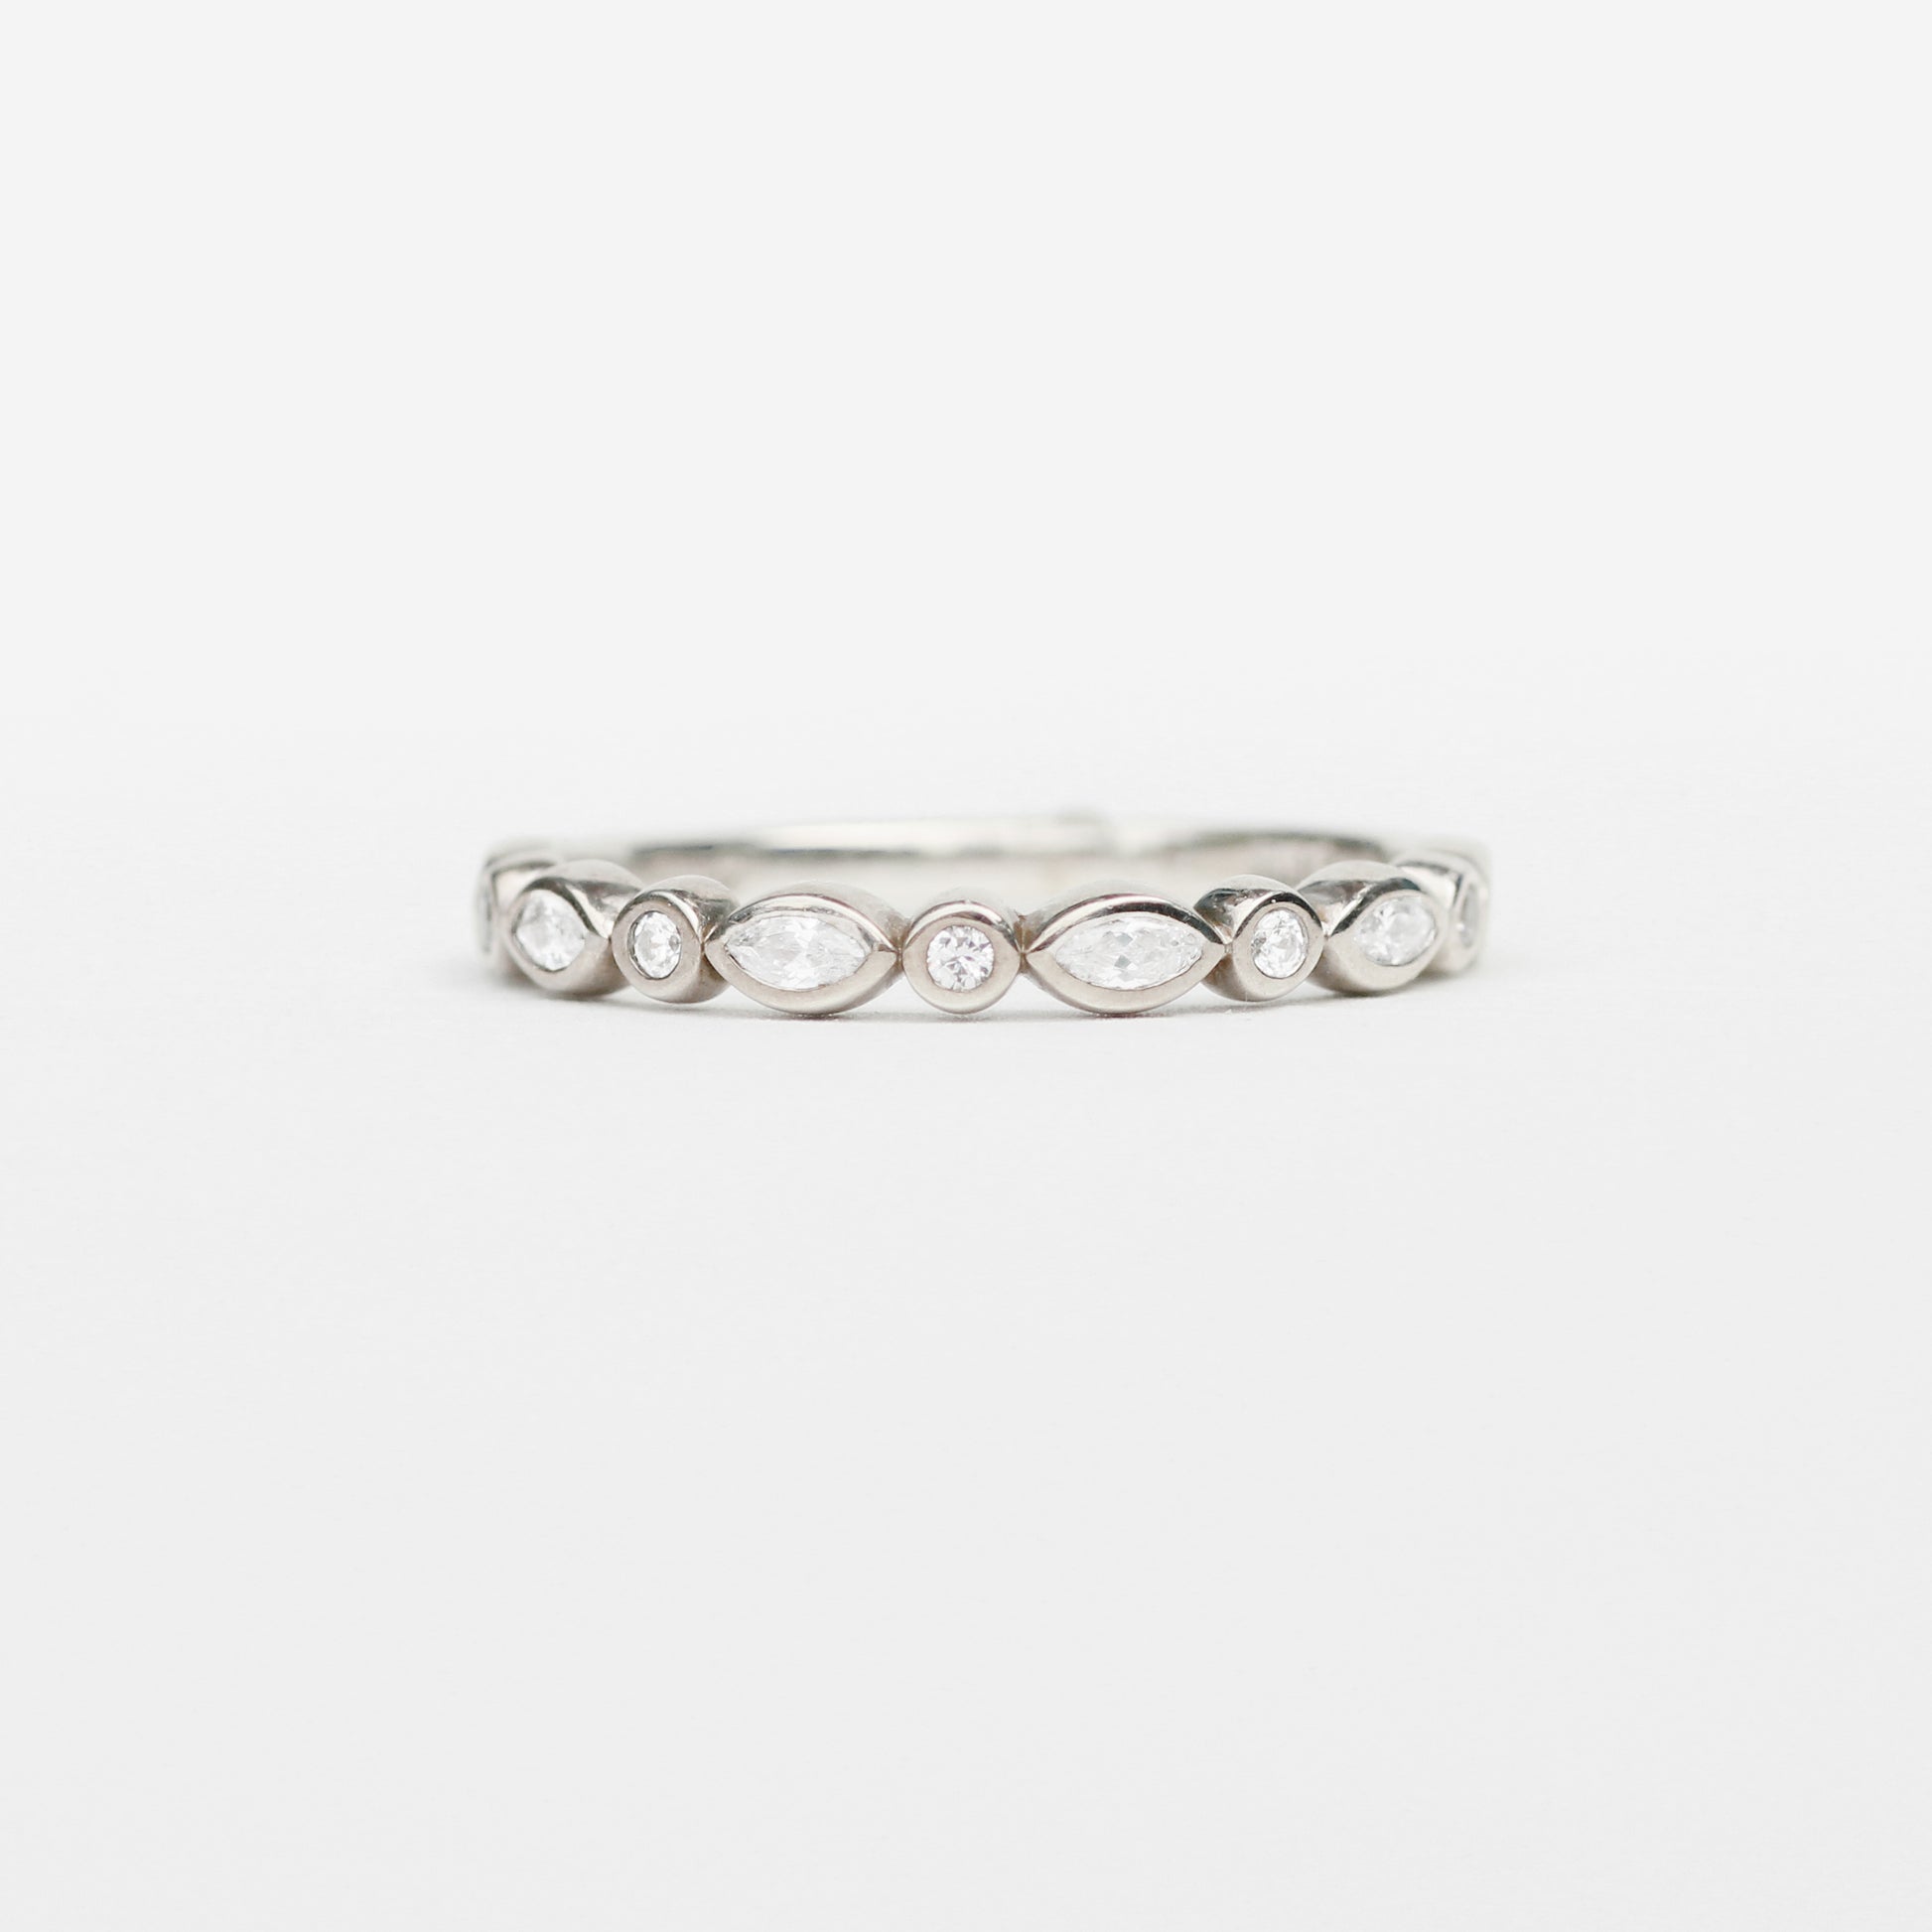 Ellyot band - diamonds in marquise and round cuts, bezel set - Your choice of metal - Midwinter Co. Alternative Bridal Rings and Modern Fine Jewelry